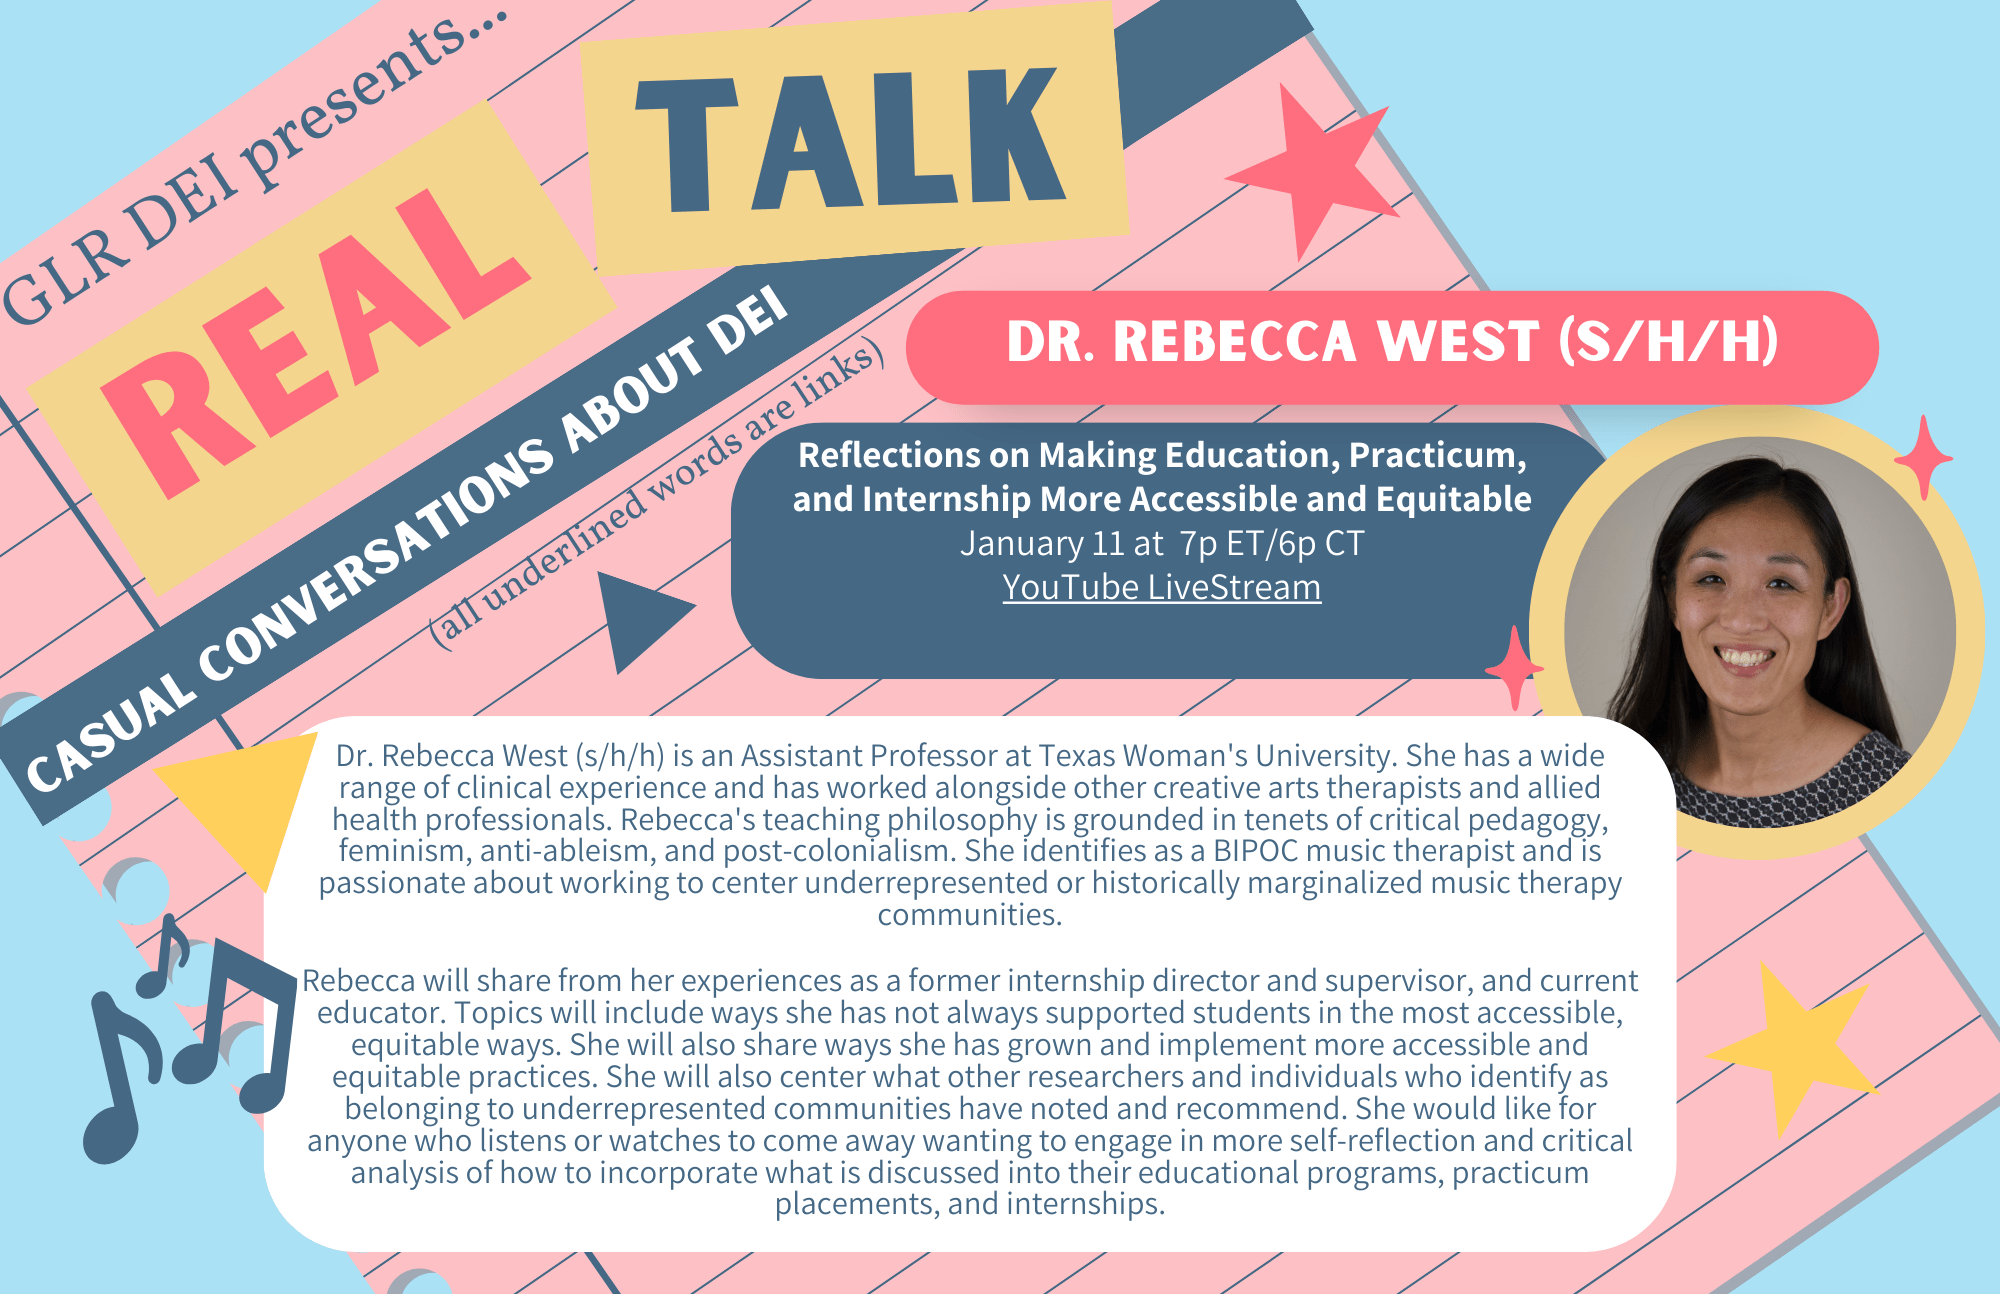 Image of the Real Talk flyer for Rebecca West. Text in image is included in post.